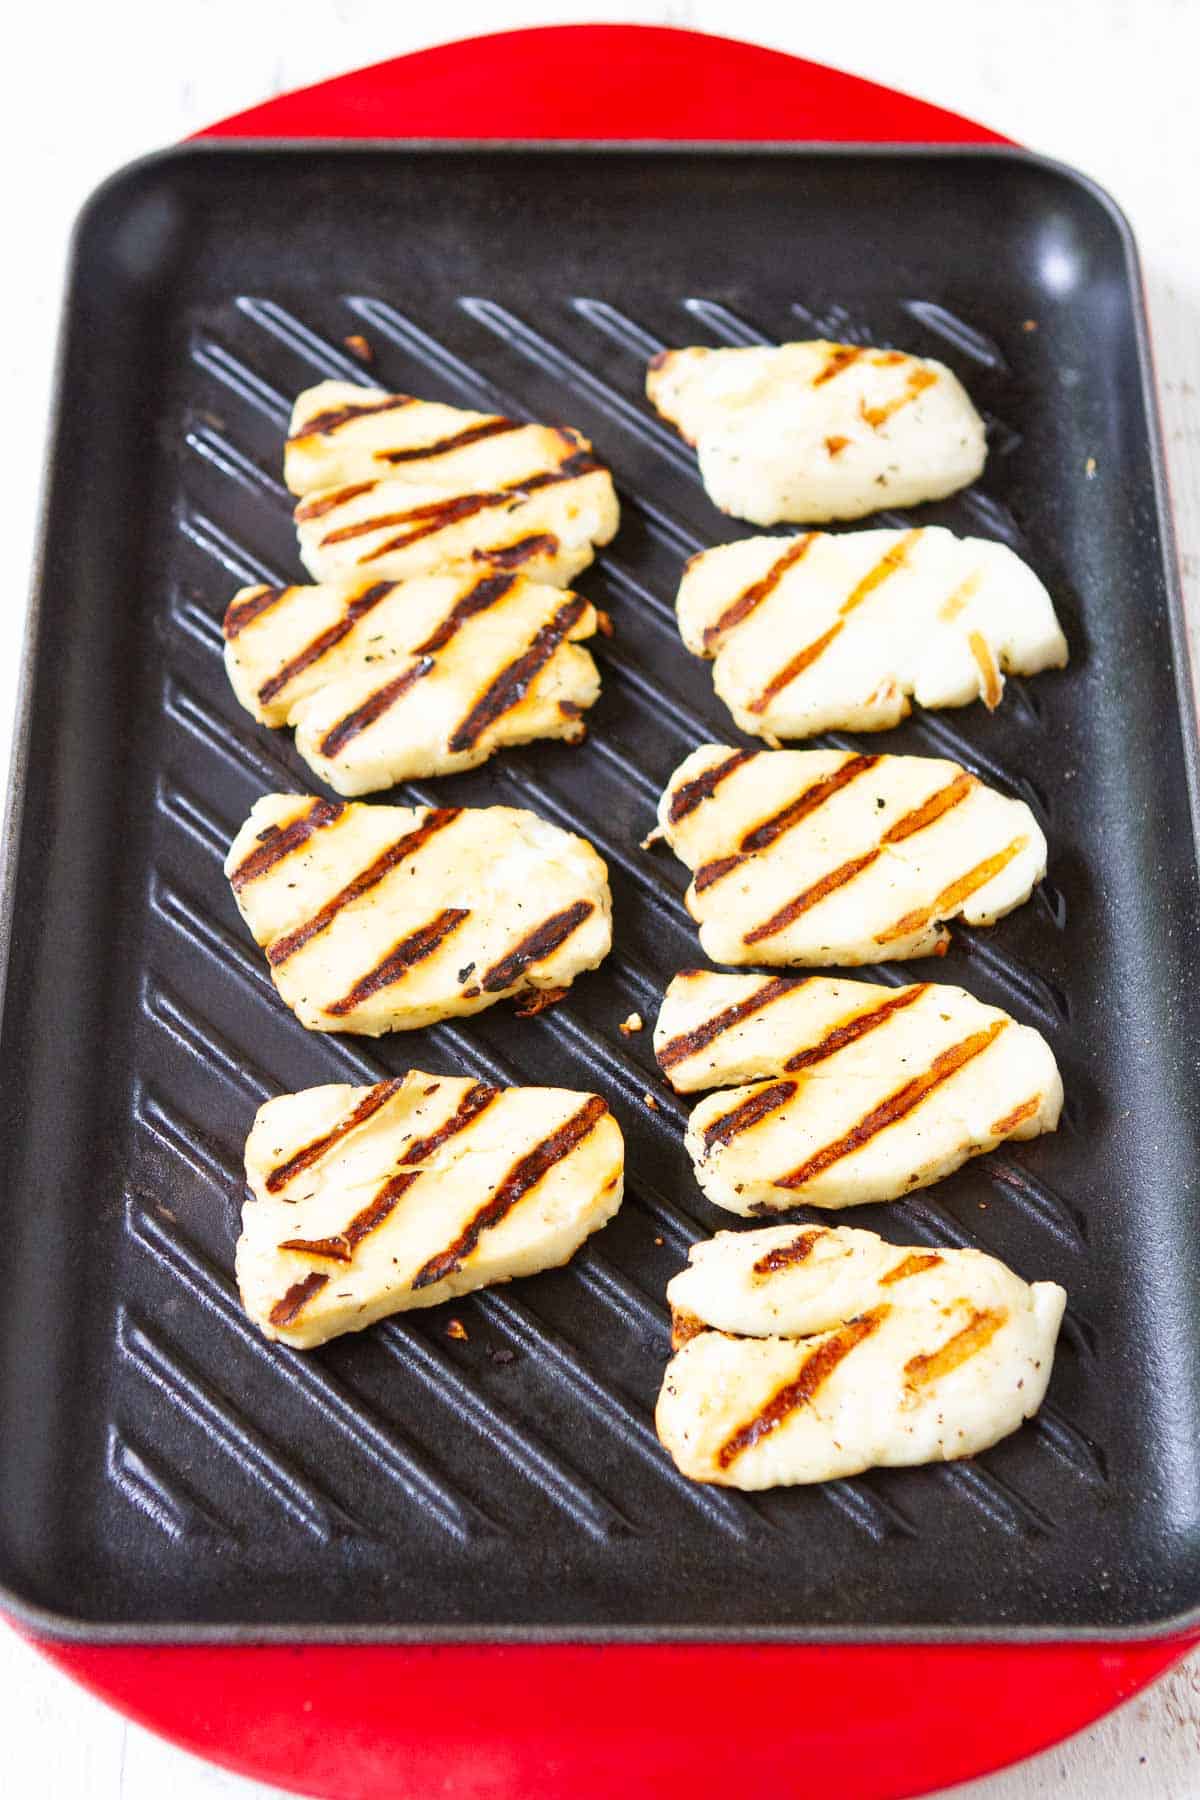 Grilled halloumi cheese on a rectangular grill pan.